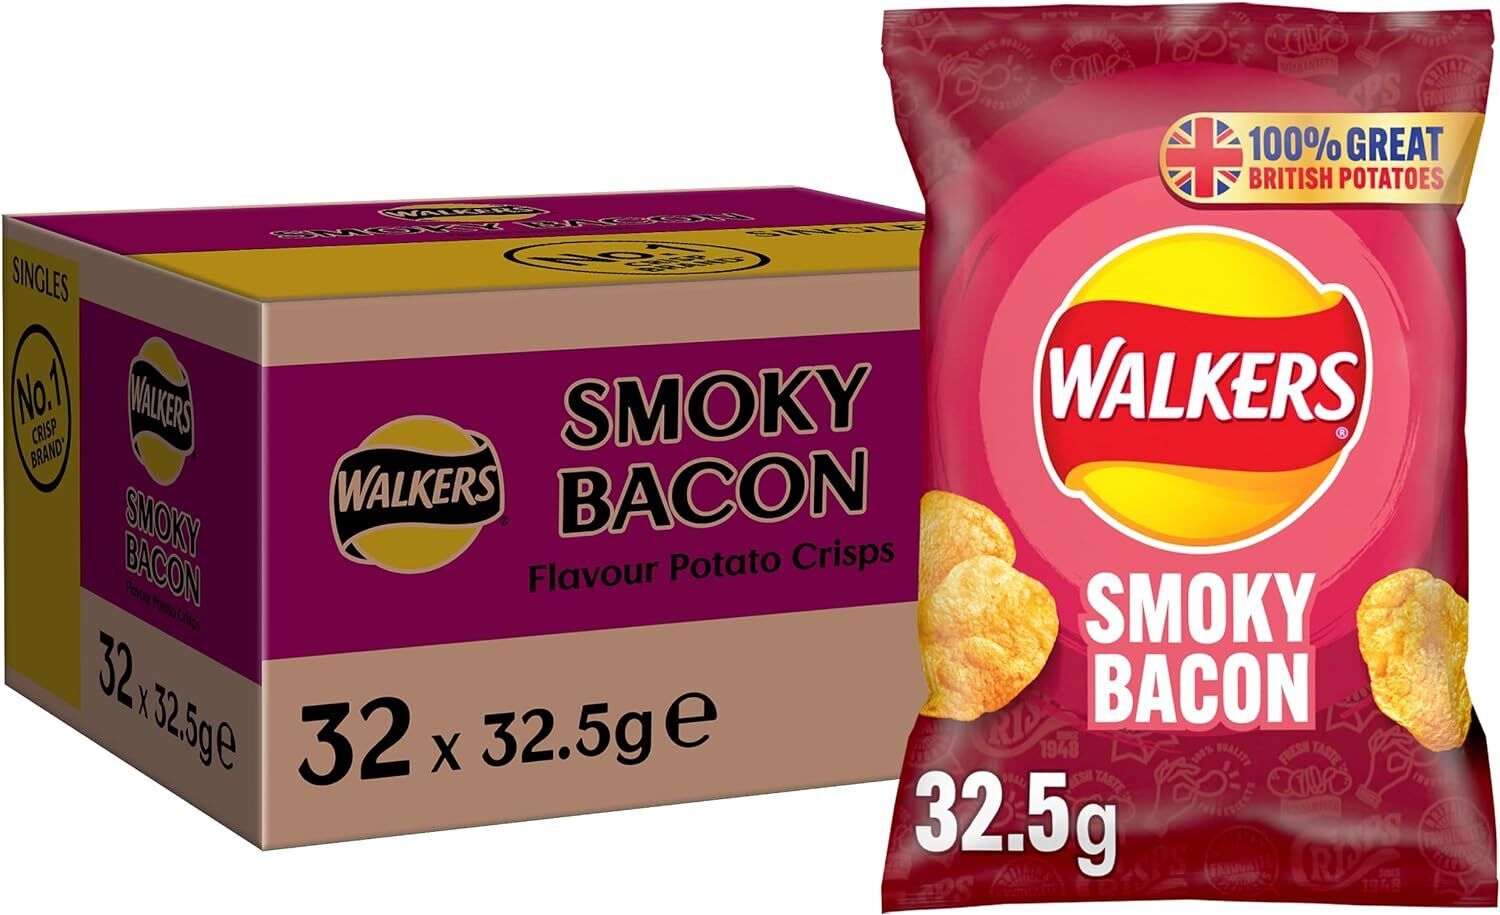 Walkers Smoky Bacon Crisps - 32.5g Pack of 32